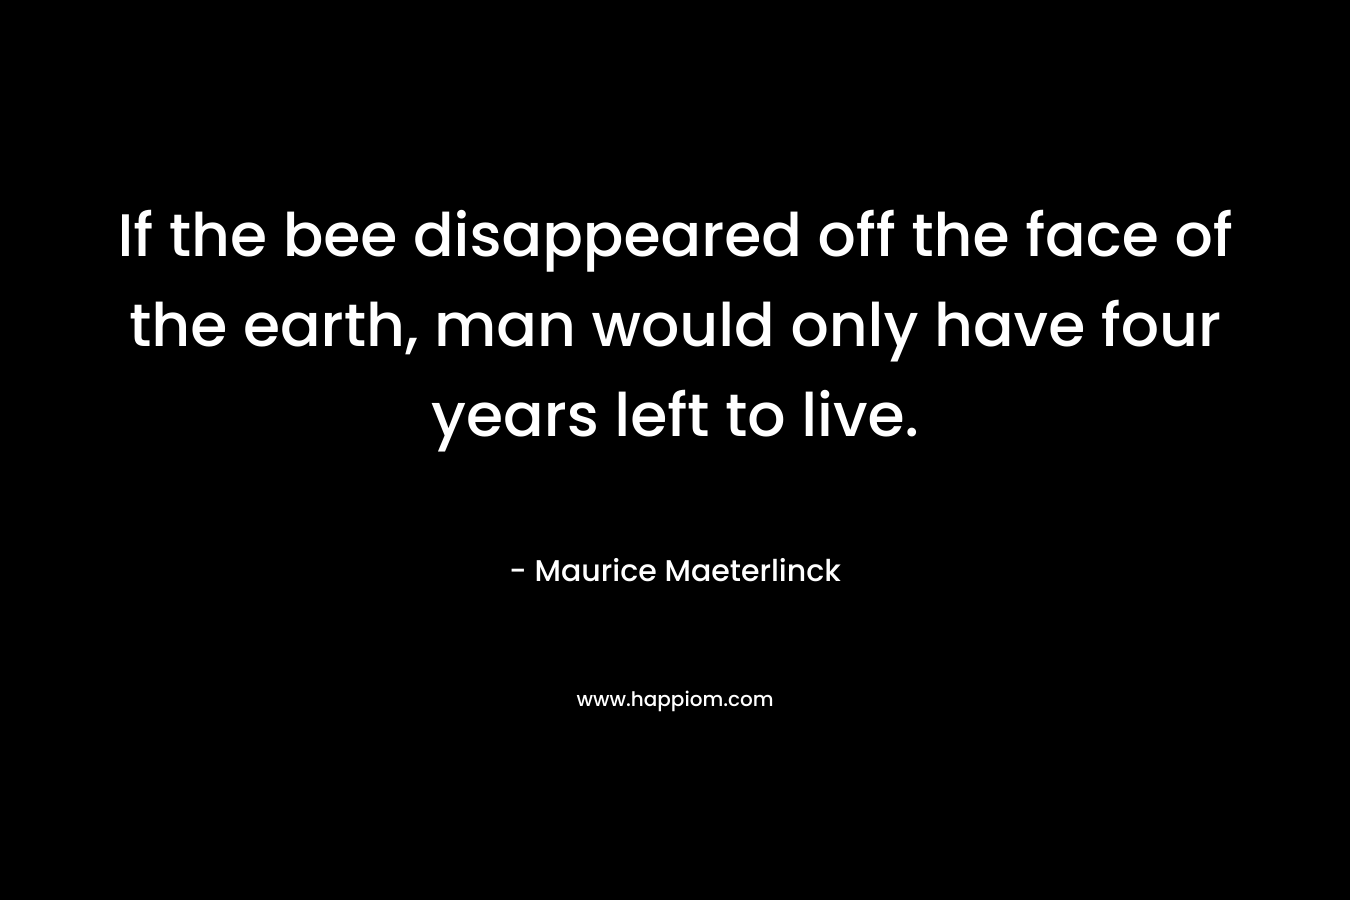 If the bee disappeared off the face of the earth, man would only have four years left to live. – Maurice Maeterlinck